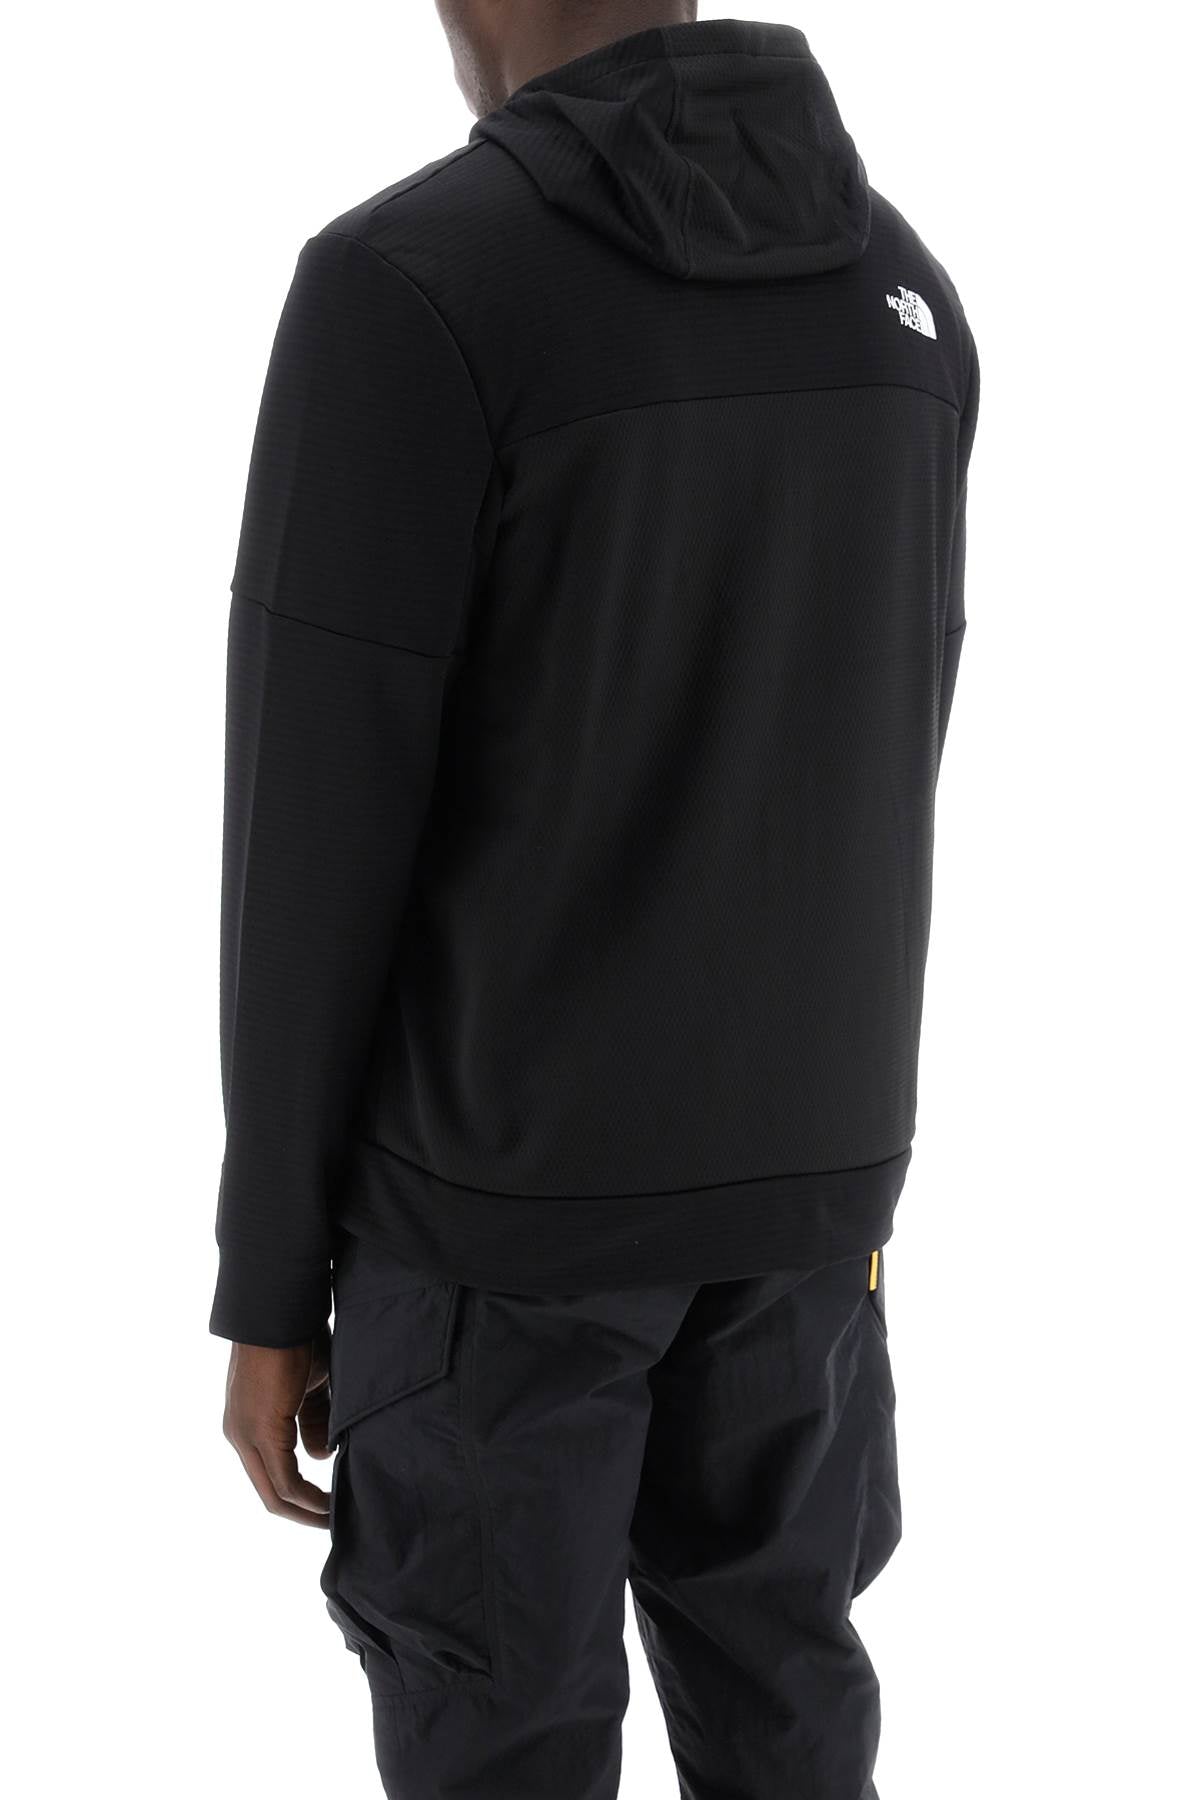 The north face hooded fleece sweatshirt with-2